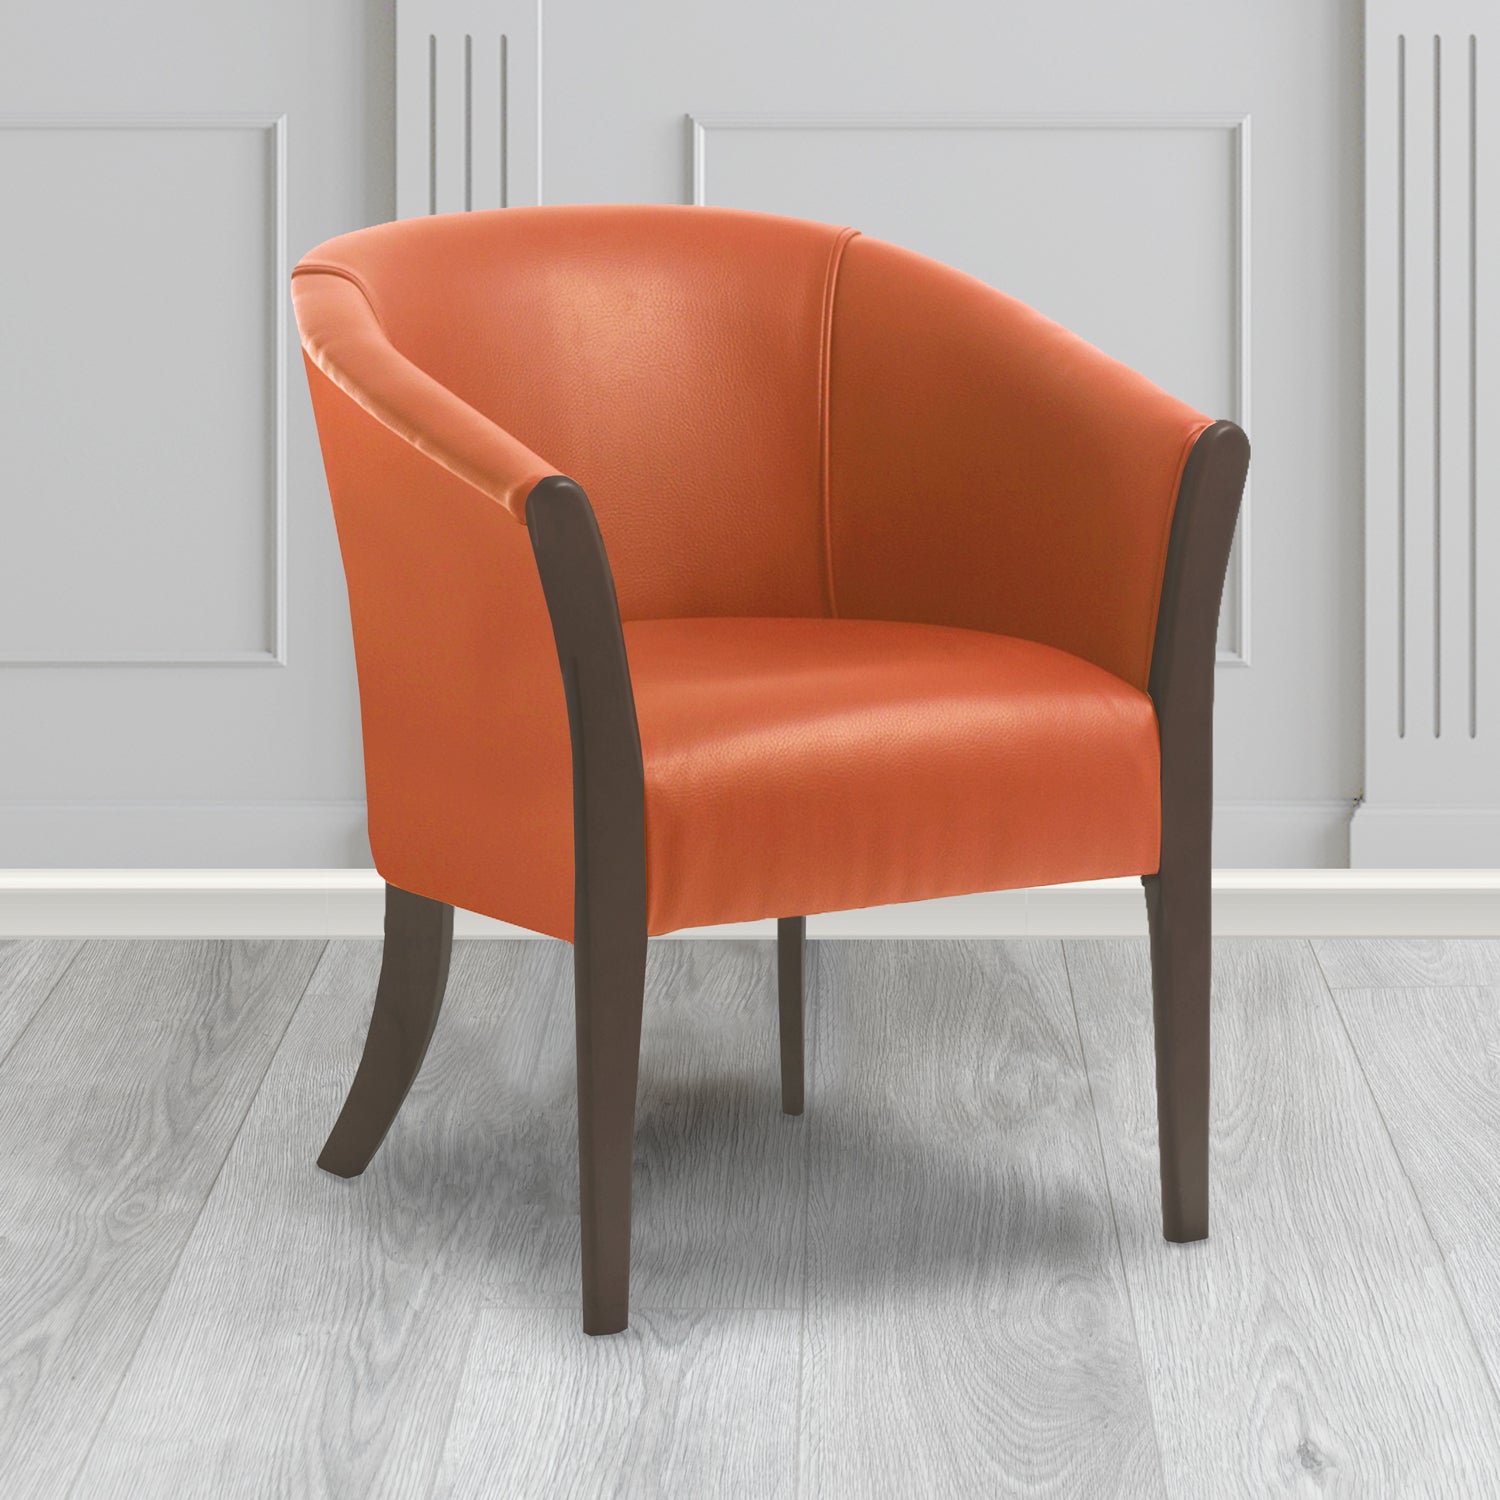 Hamilton Tub Chair in Agua Paint Pot Burnt Orange Crib 5 Faux Leather - Antimicrobial, Stain Resistant & Waterproof - The Tub Chair Shop